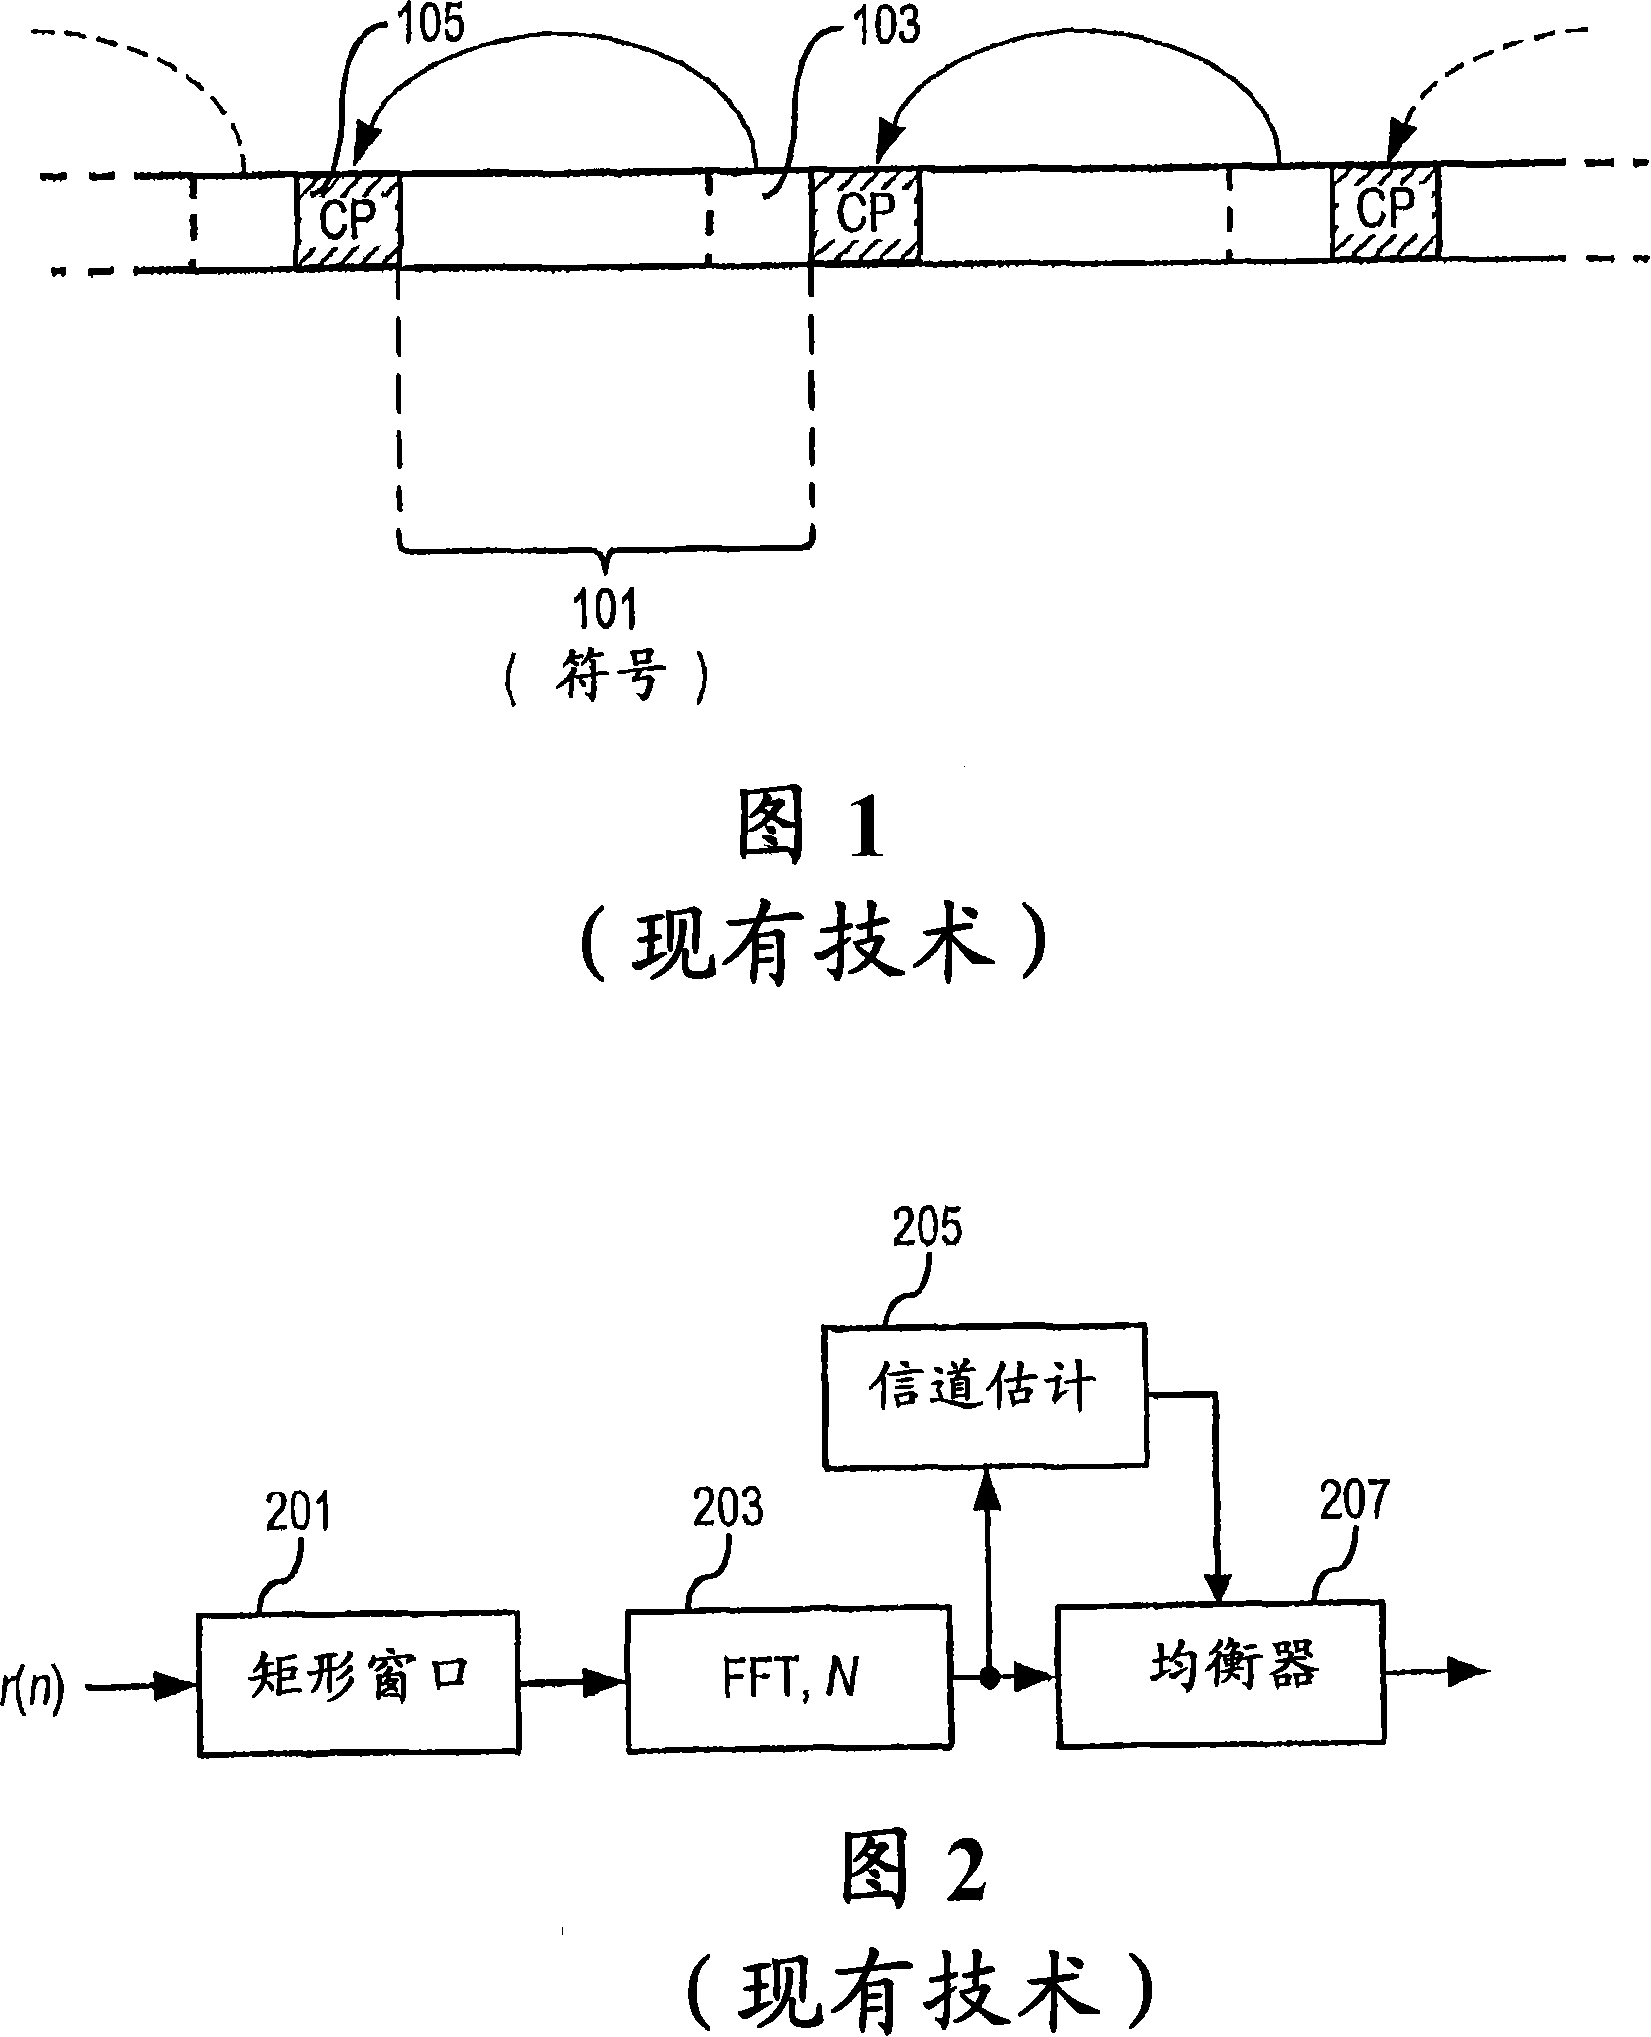 Time domain windowing and inter-carrier interference cancellation